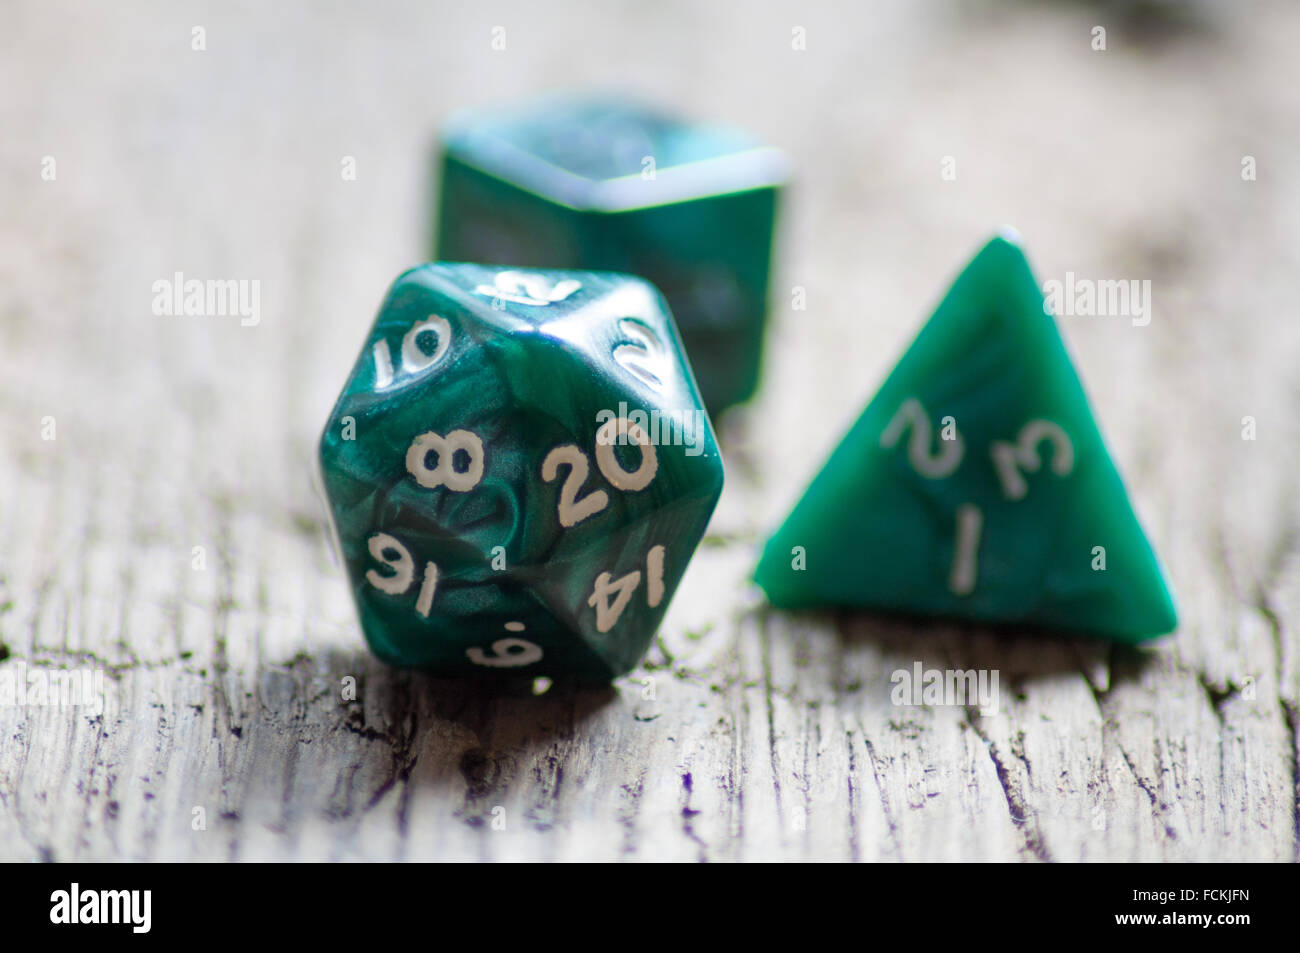 Twenty sided dice used for various board games Stock Photo